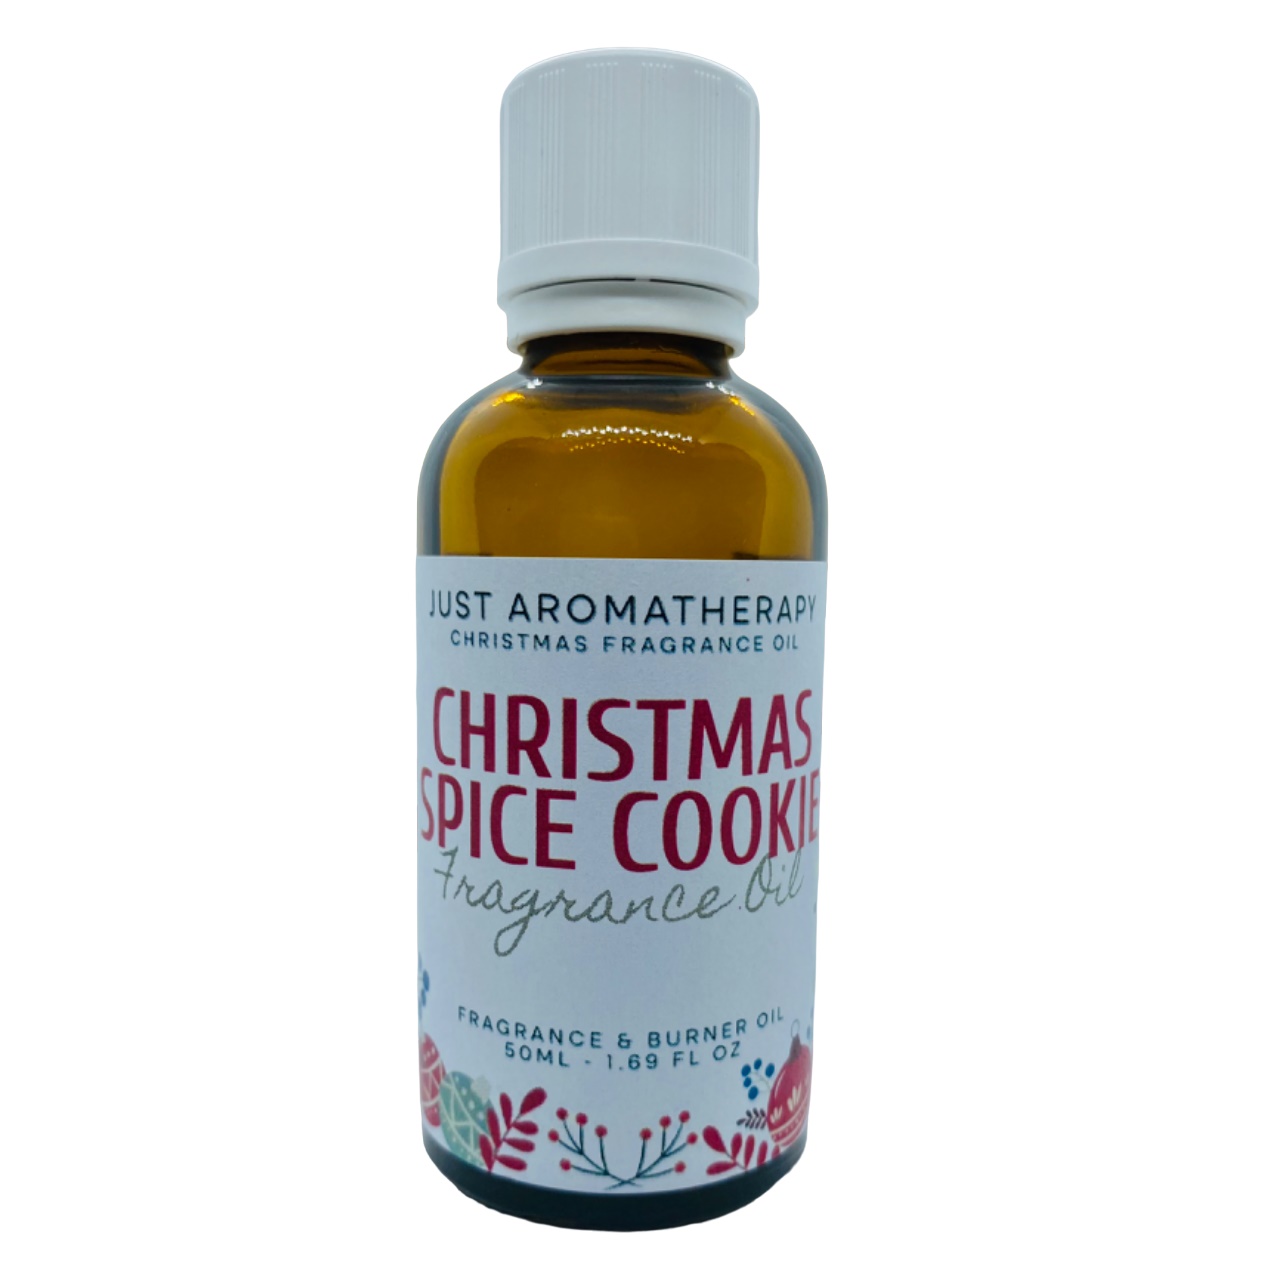 Christmas Spice Cookie, Christmas & Winter Fragrance Oil - Refresher Oils - 50ml